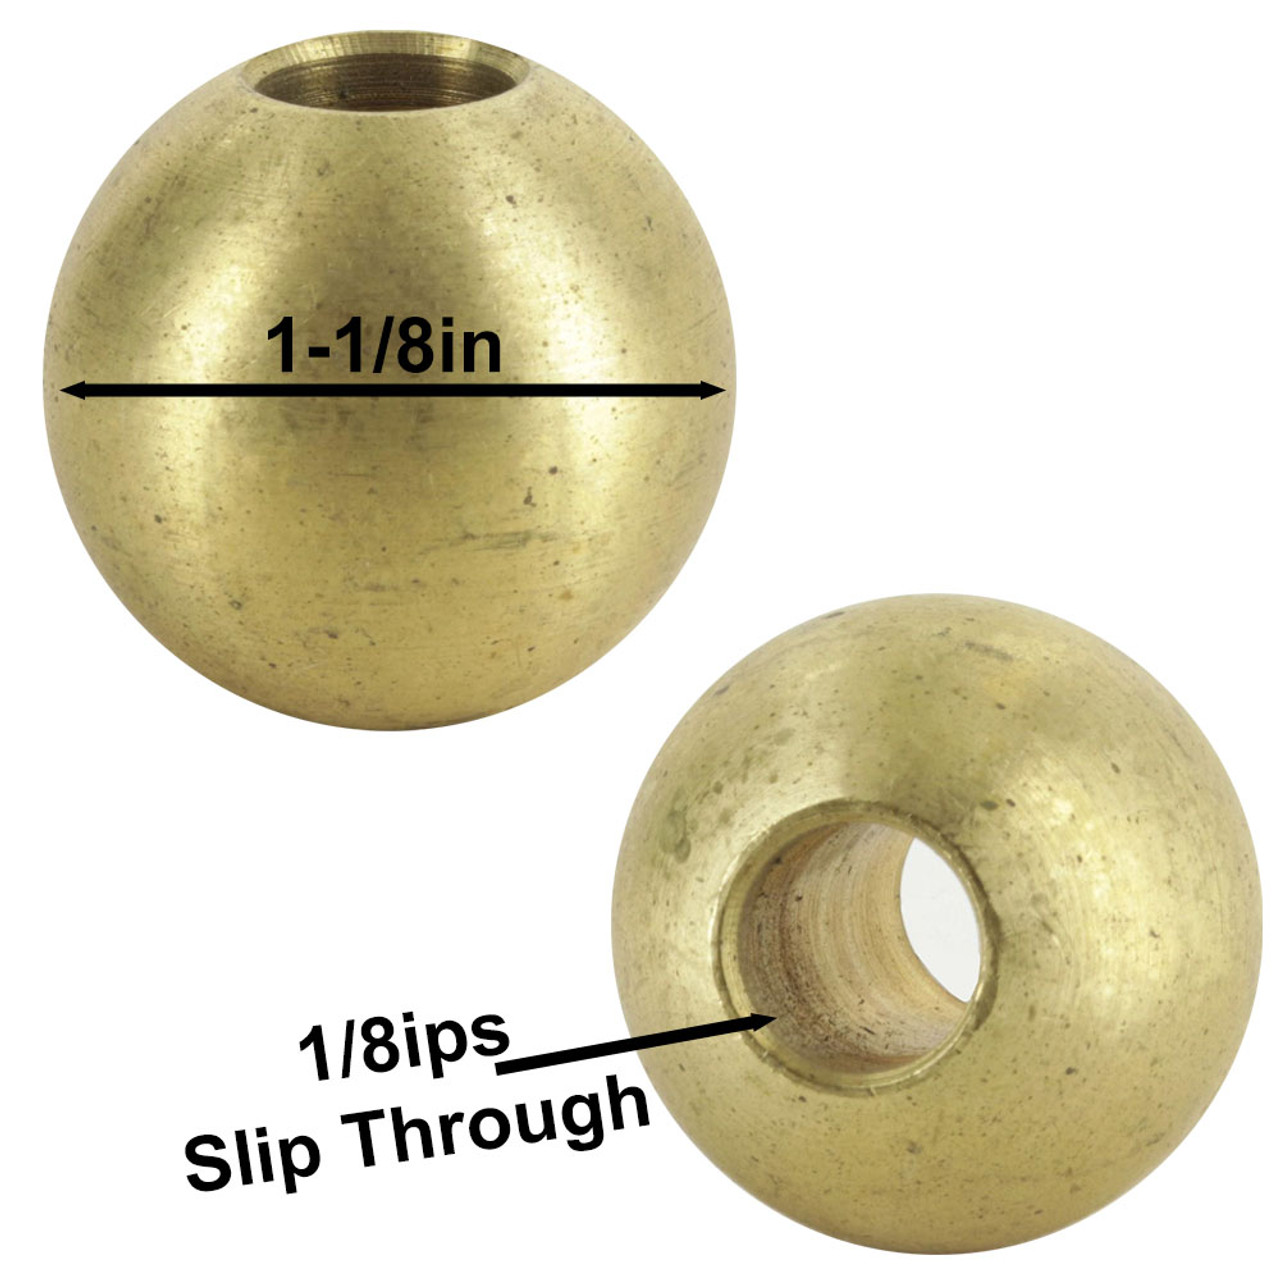 2-1/4in Diameter Steel Cone Cup with 1/8ips Slip Through Center Hole -  Antique Brass Finish